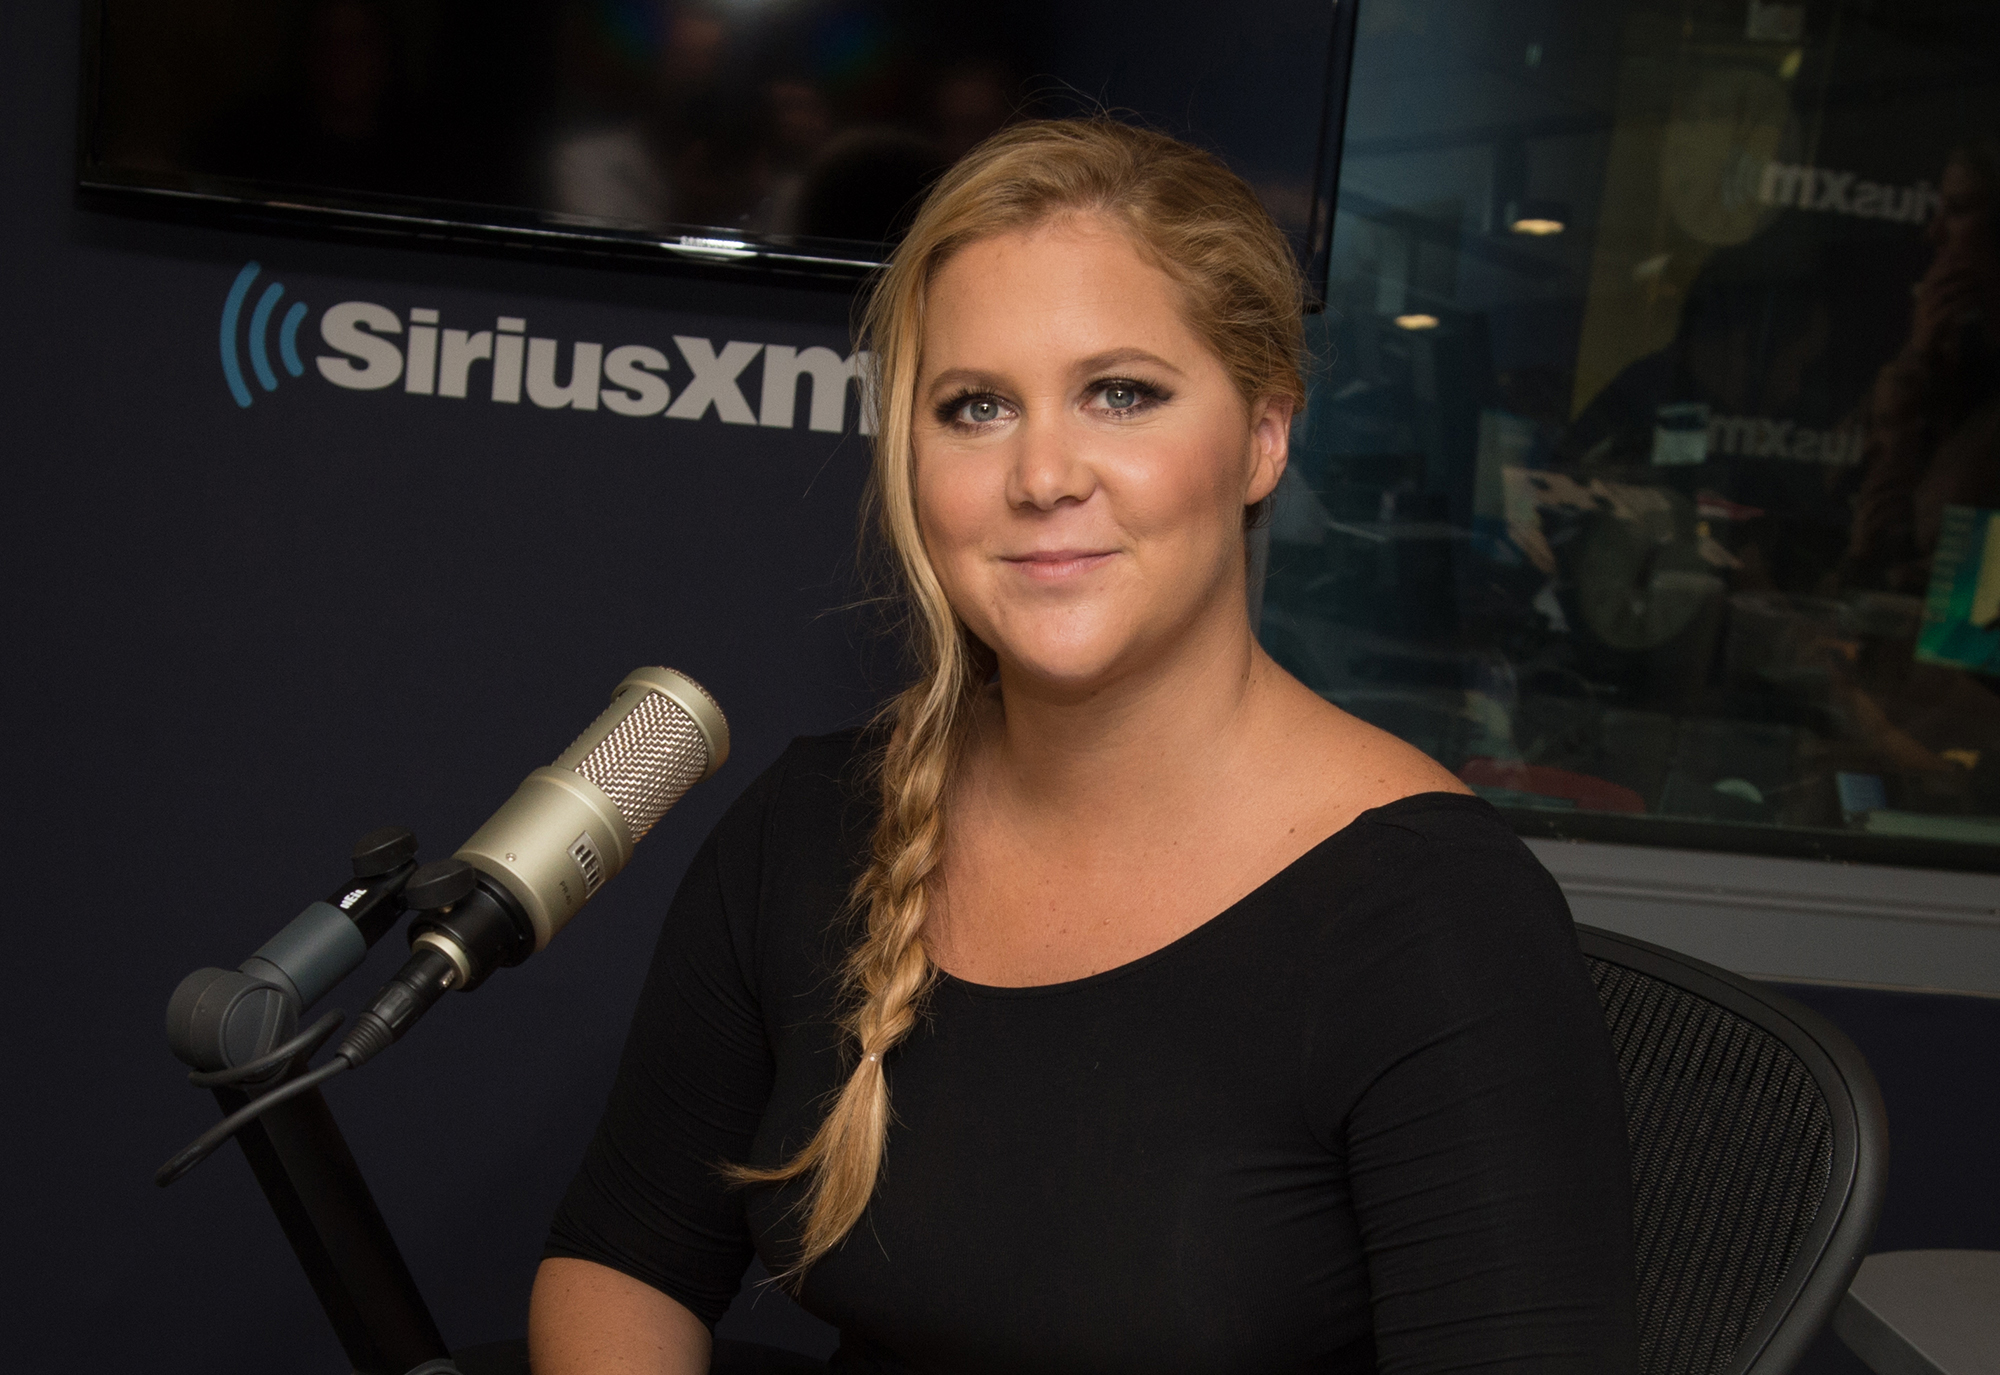 Amy Schumer visits SiriusXM at SiriusXM Studio in New York City on Aug. 23, 2016. (J. Kempin—Getty Images)